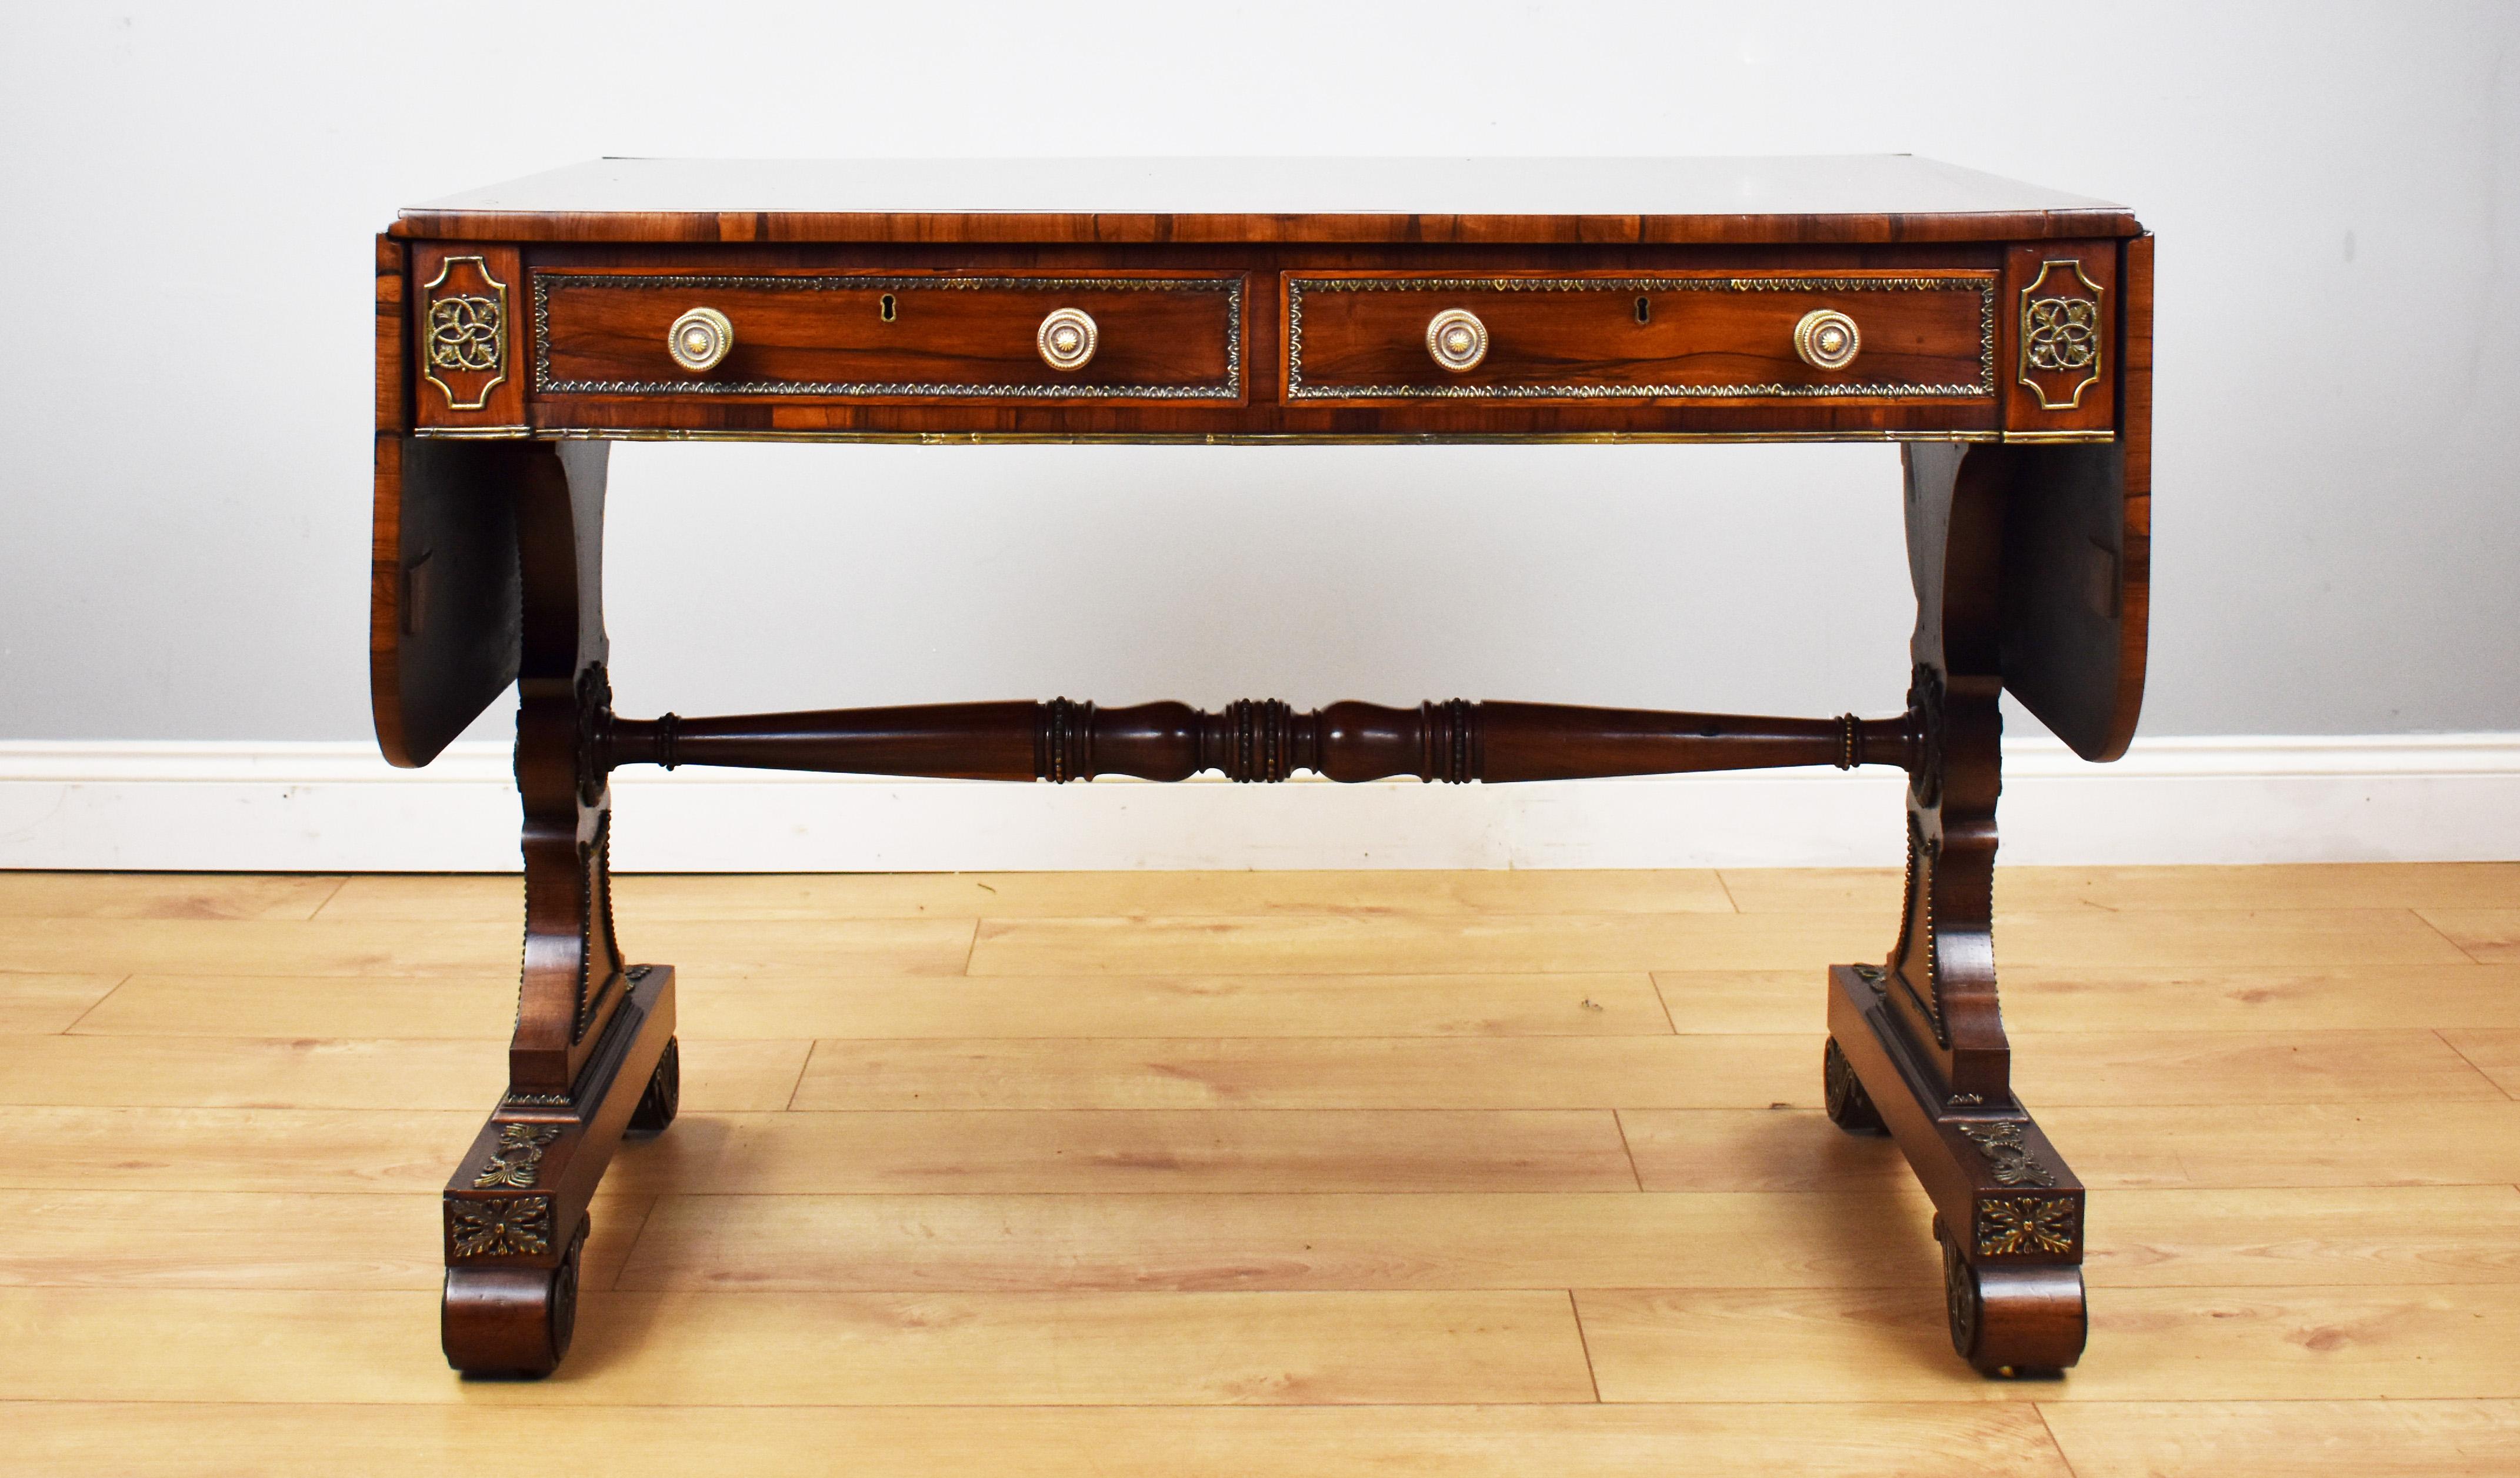 For sale is a fine quality Regency period rosewood and brass inlaid sofa table, having drop-leaf ends outlined with brass fleur-de-lis inlay over a pair of frieze drawers with brass mouldings and brass handles, with two dummy drawers on the opposing